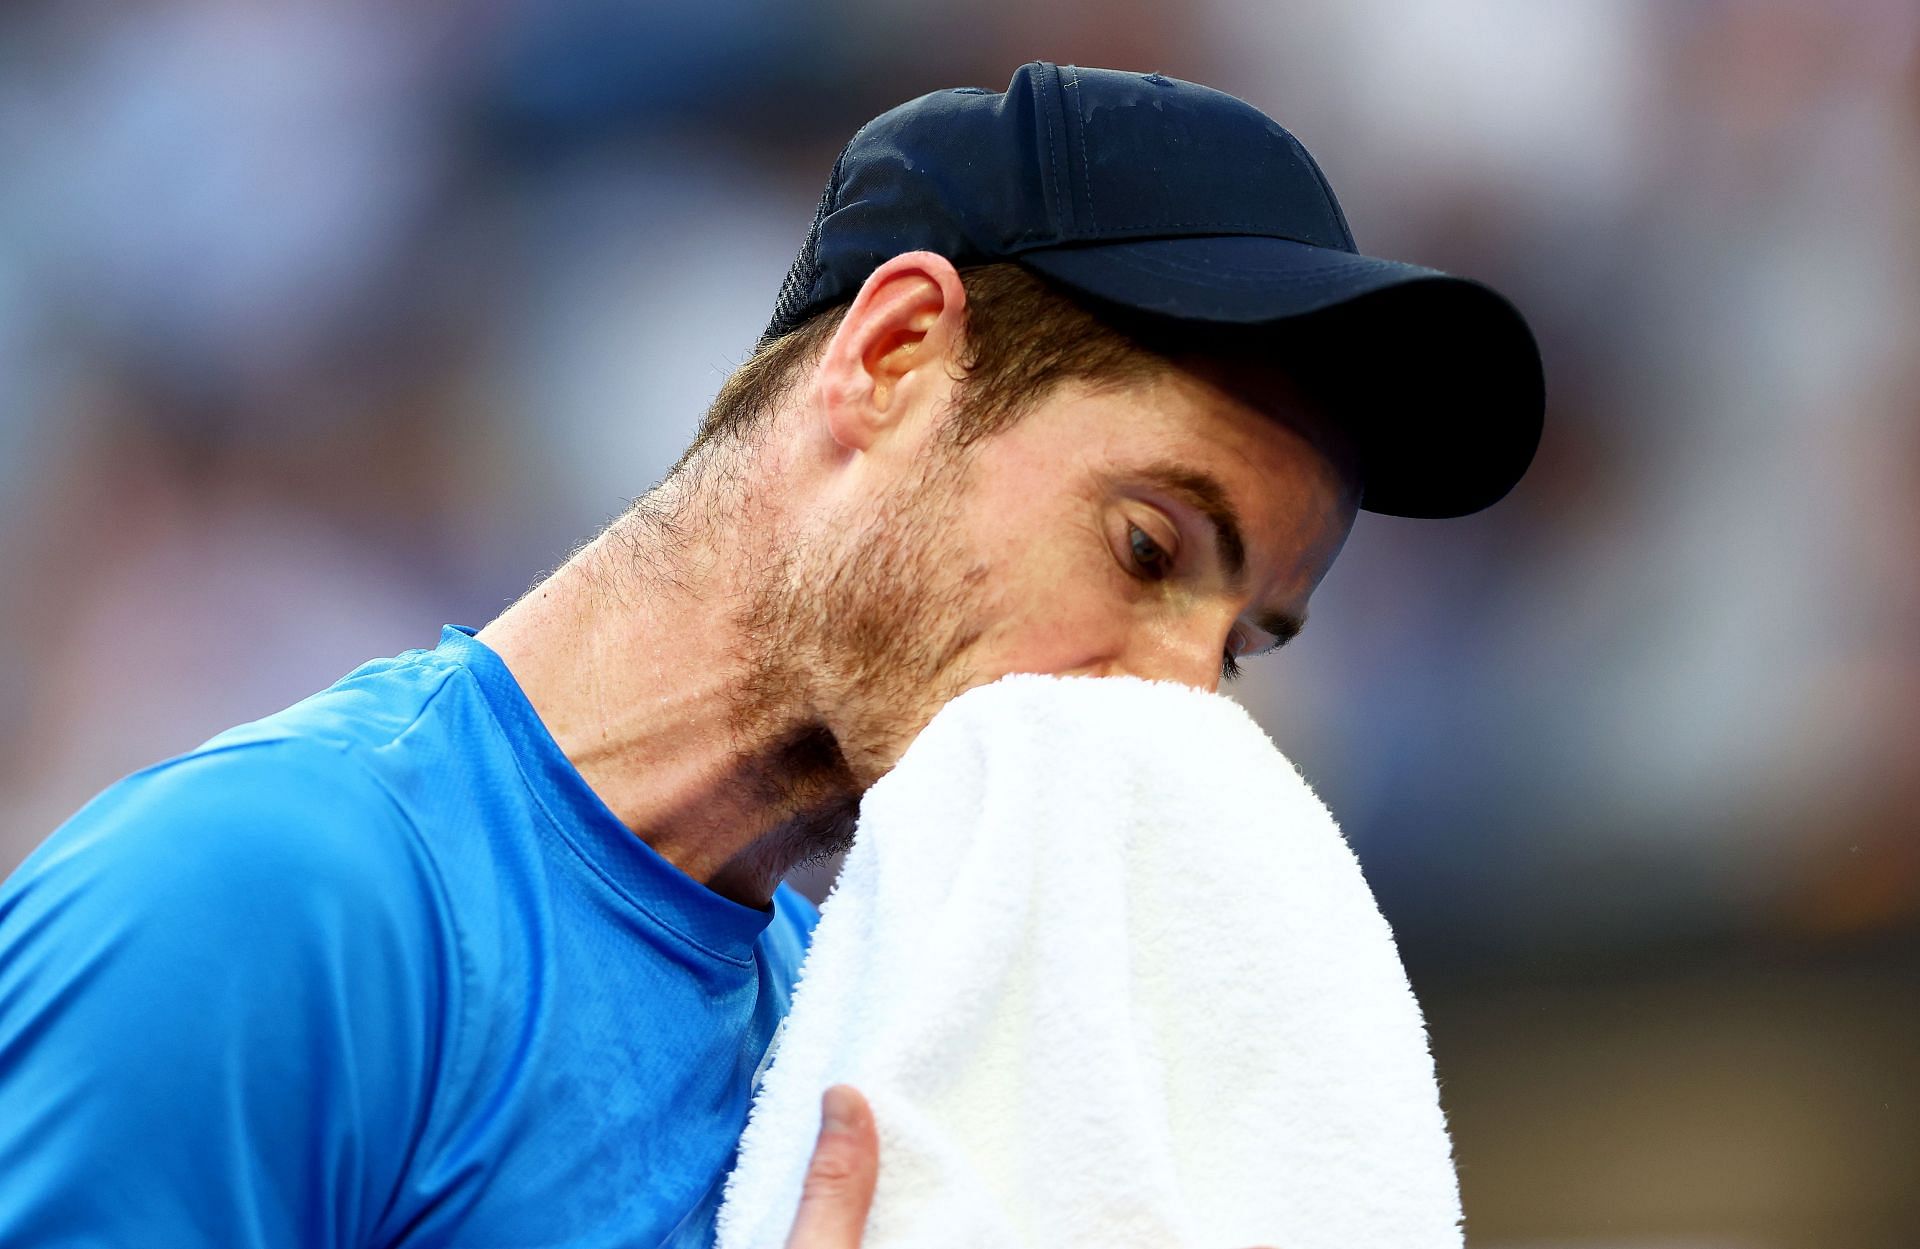 Andy Murray has opted out of the clay court season this year